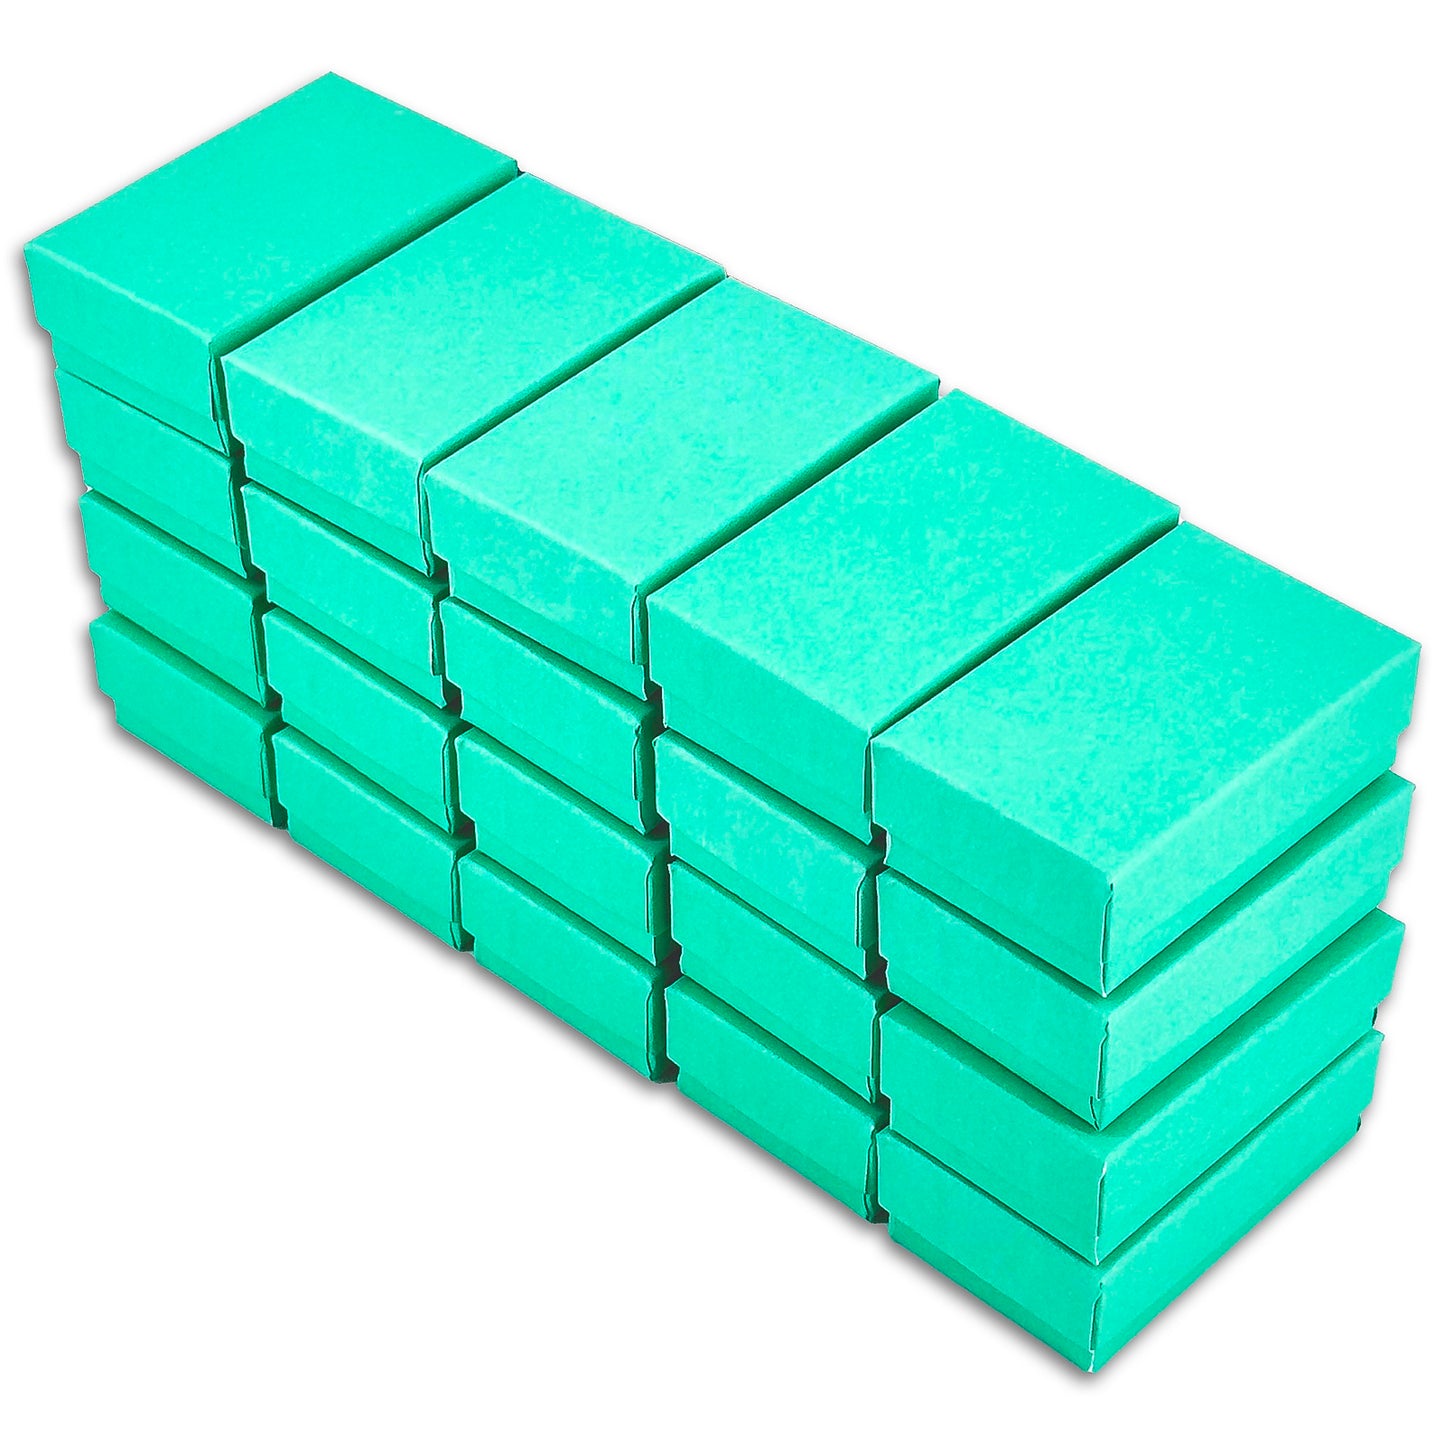 3 1/4" x 2 1/4" x 1" Teal Green Cotton Filled Box